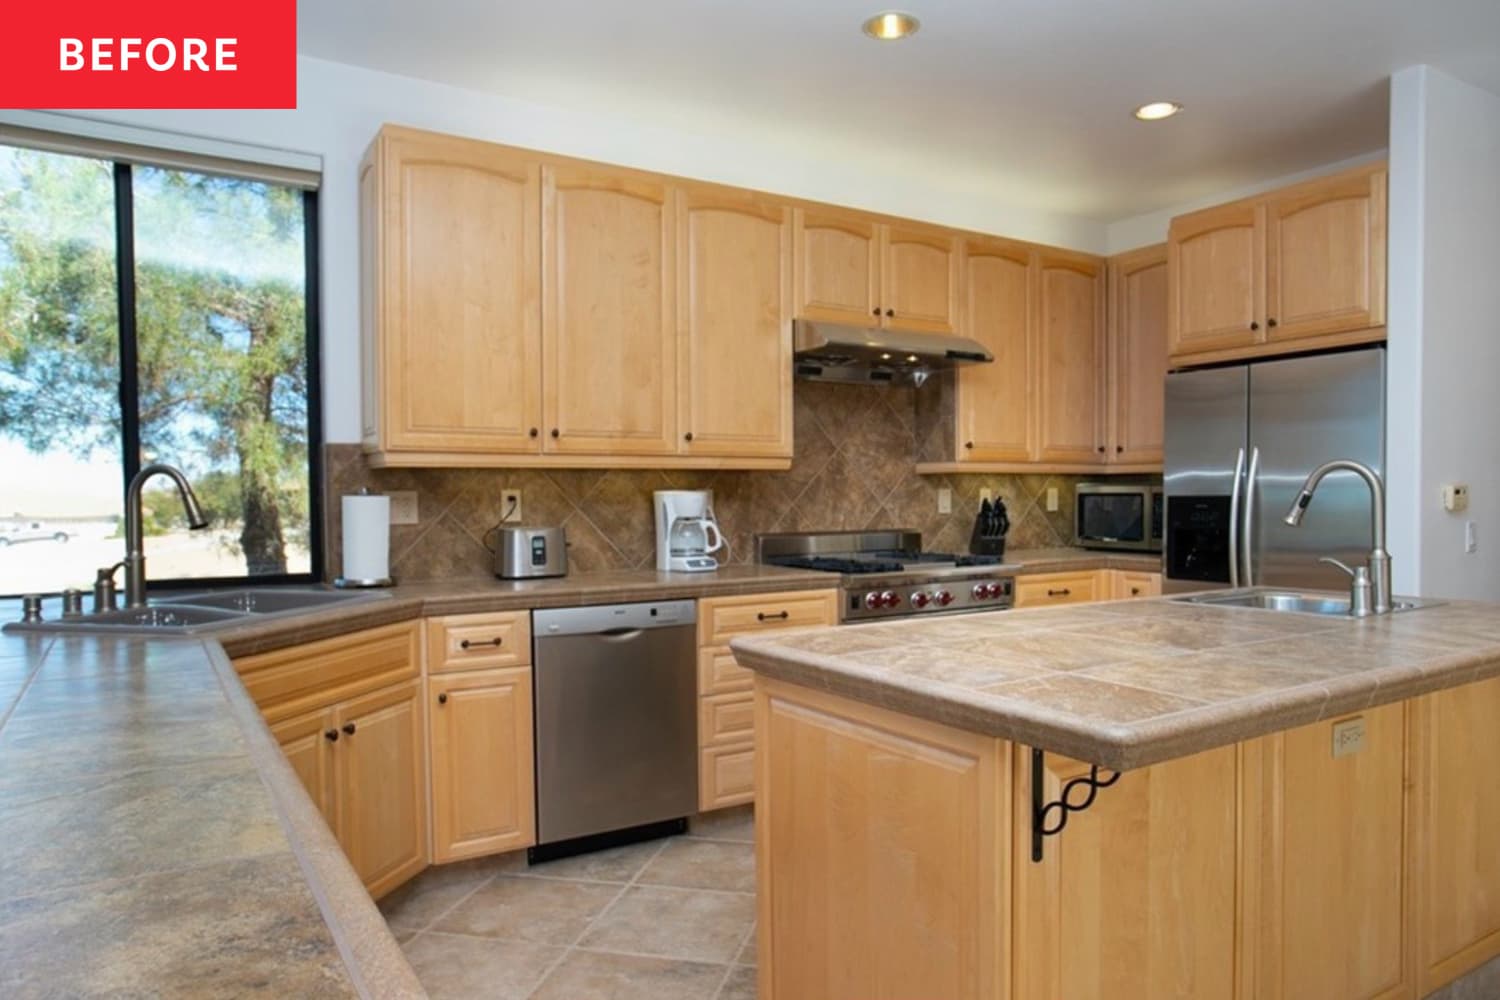 Before and After: You Have to See What a $2,000 Makeover Did for This Early 2000s Kitchen